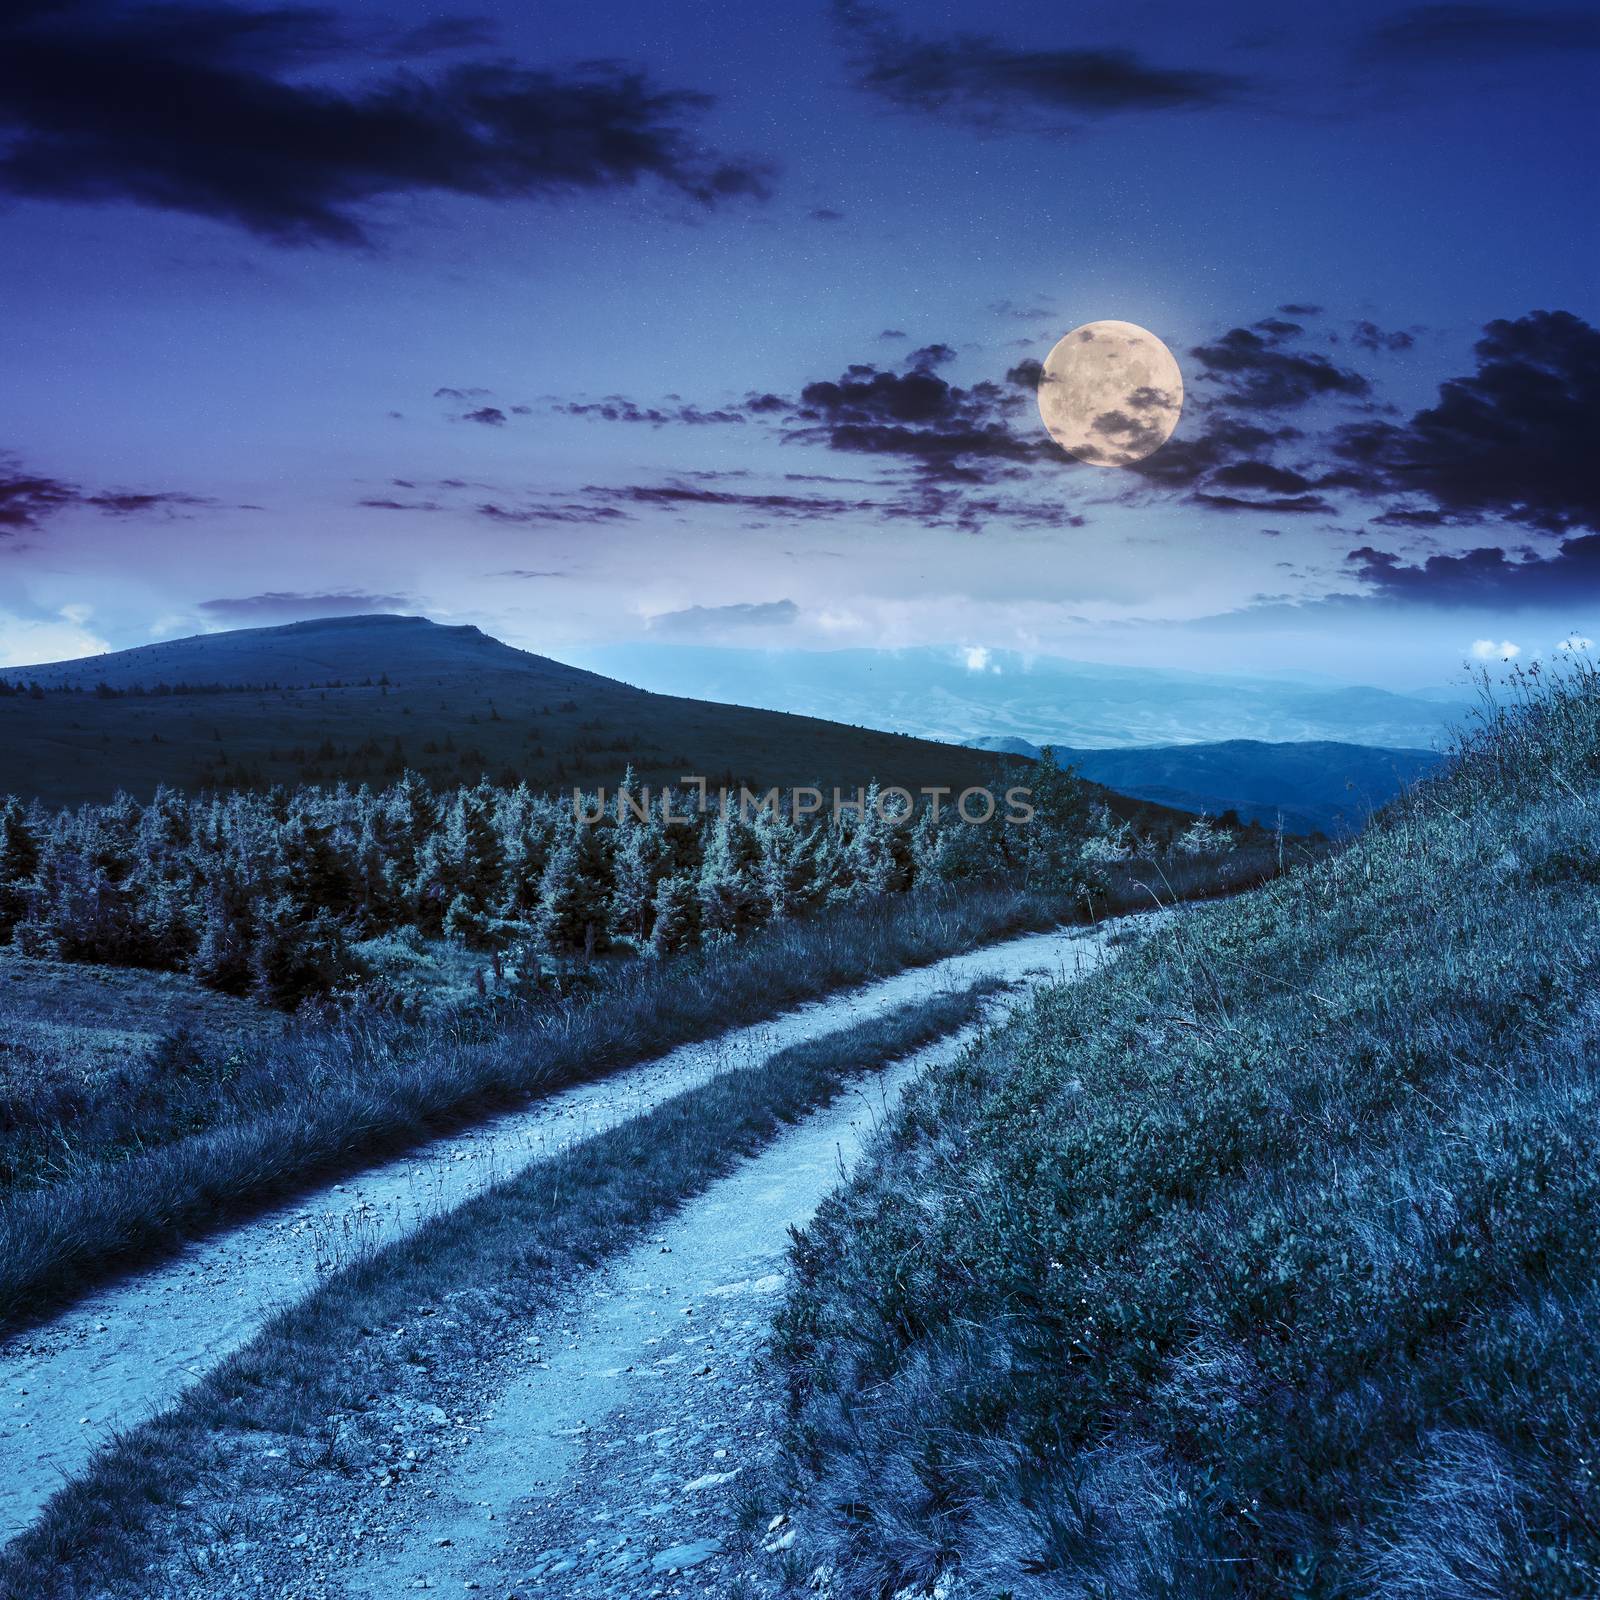 summer Landscape with road on a hillside and conifer forest  near mountain peak at night in full moon light